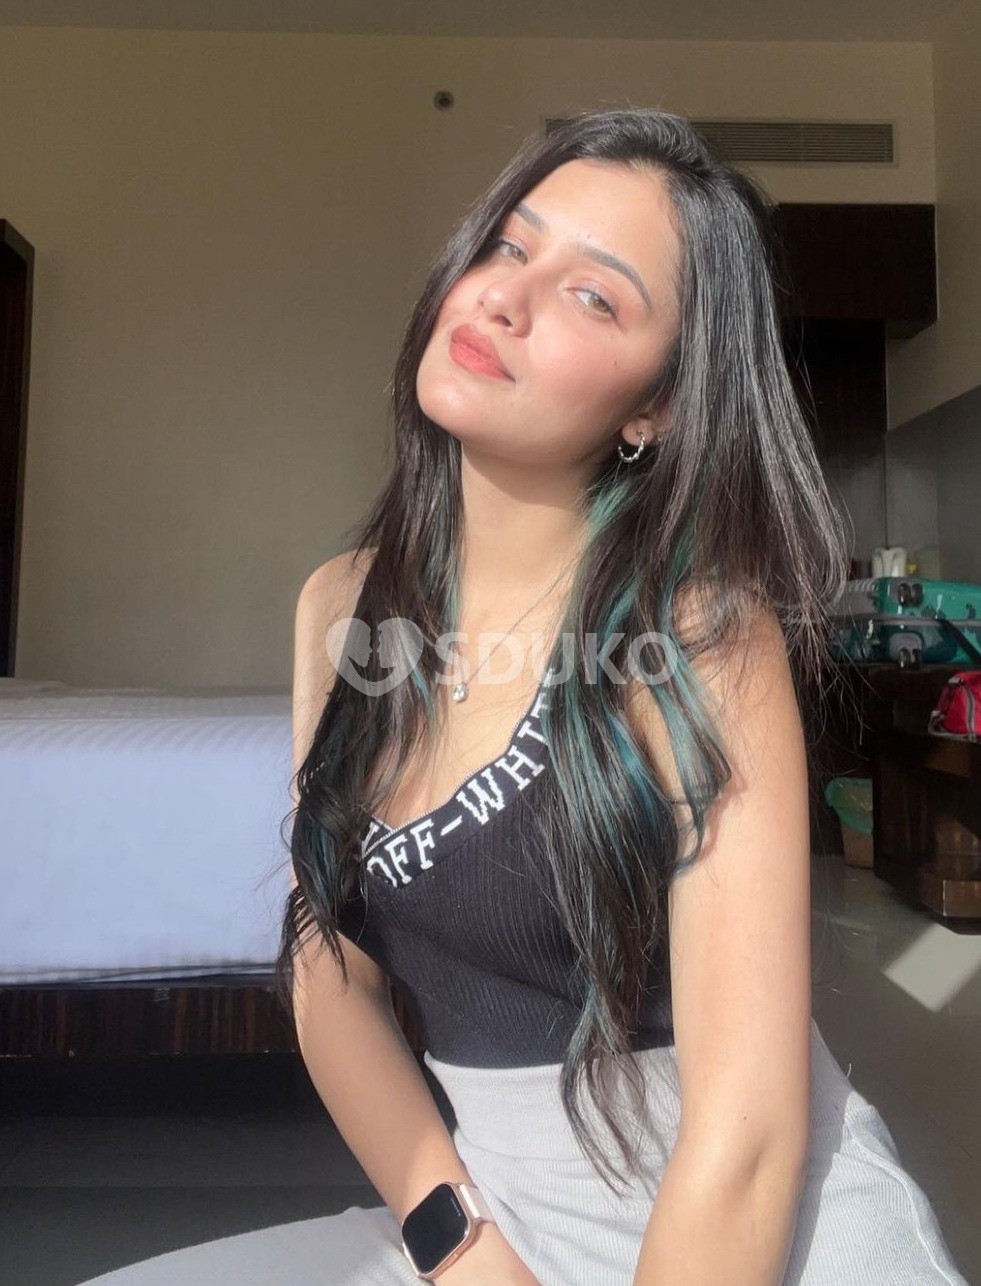 Dehradun ✅ 24x7 AFFORDABLE CHEAPEST RATE SAFE CALL GIRL SERVICE AVAILABLE OUTCALL AVAILABLEjfj